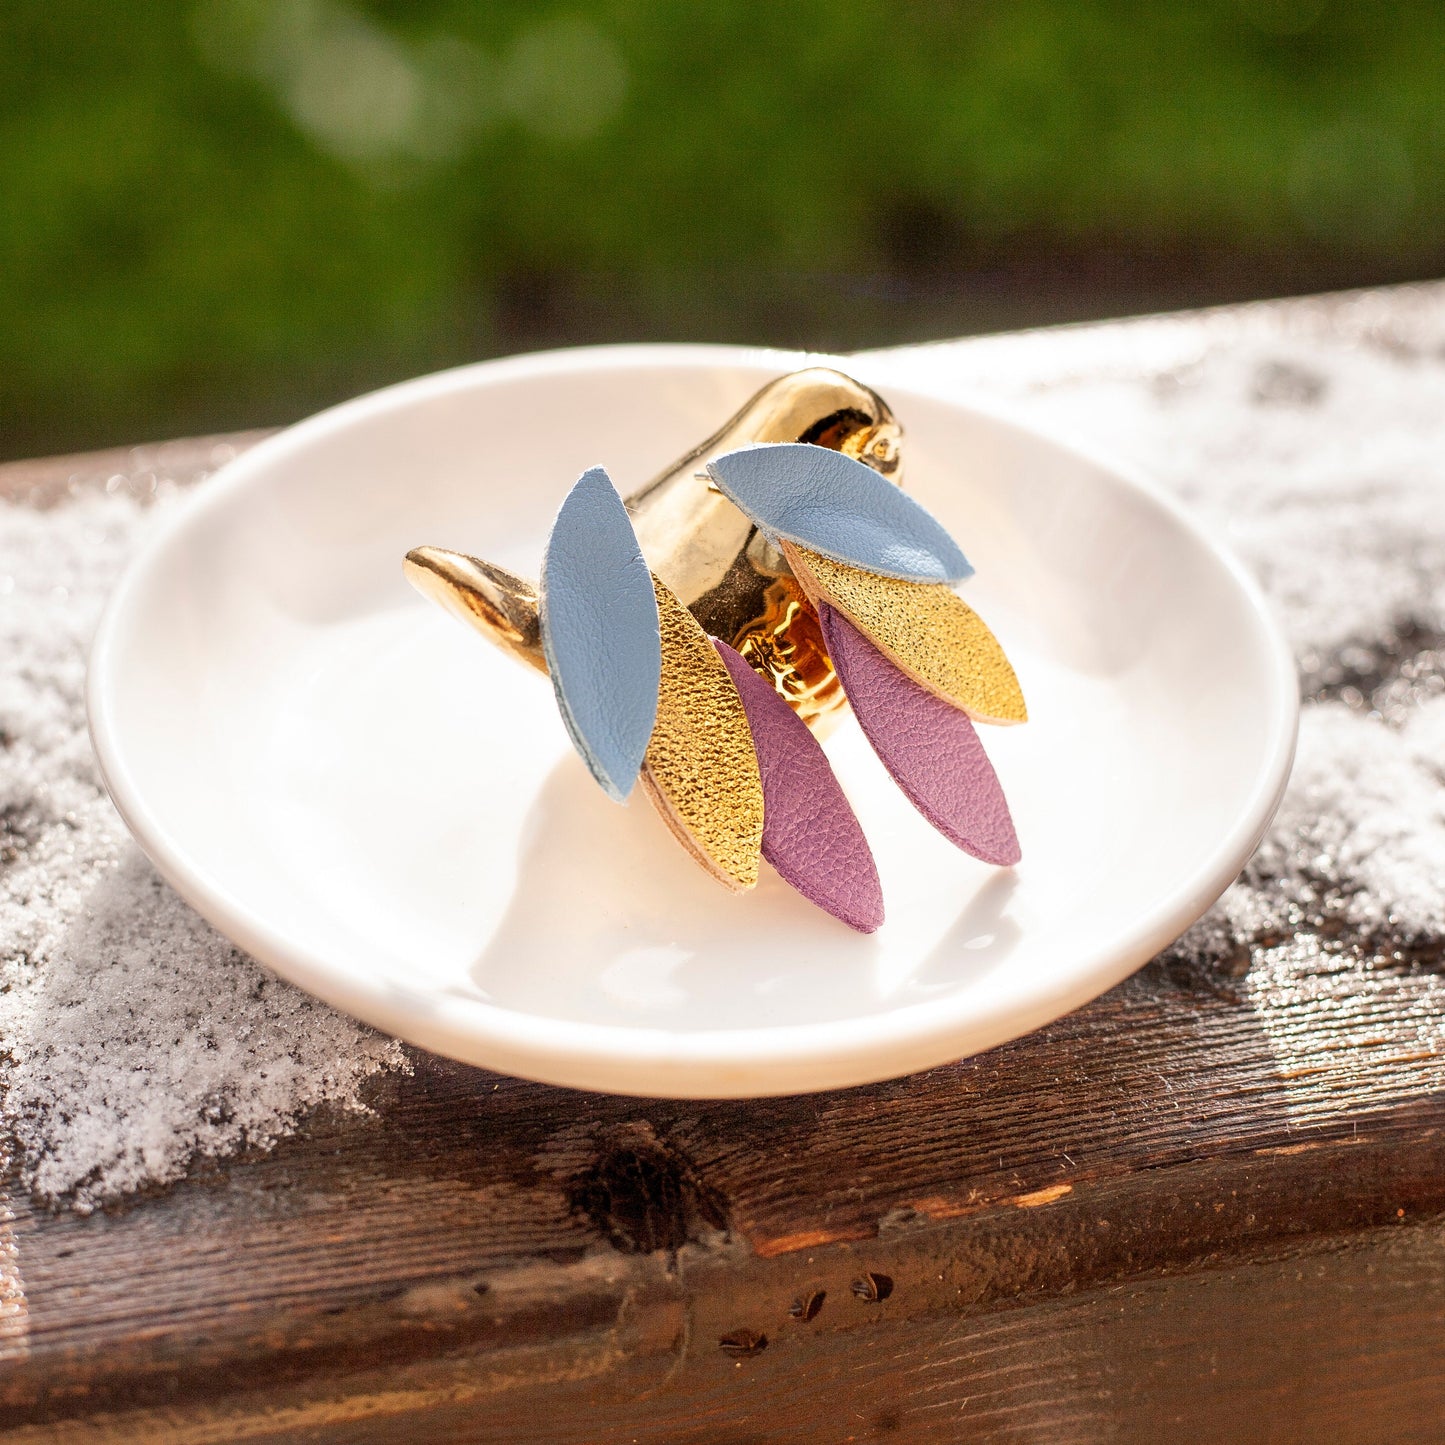 Gold blue and mauve leather stud earrings